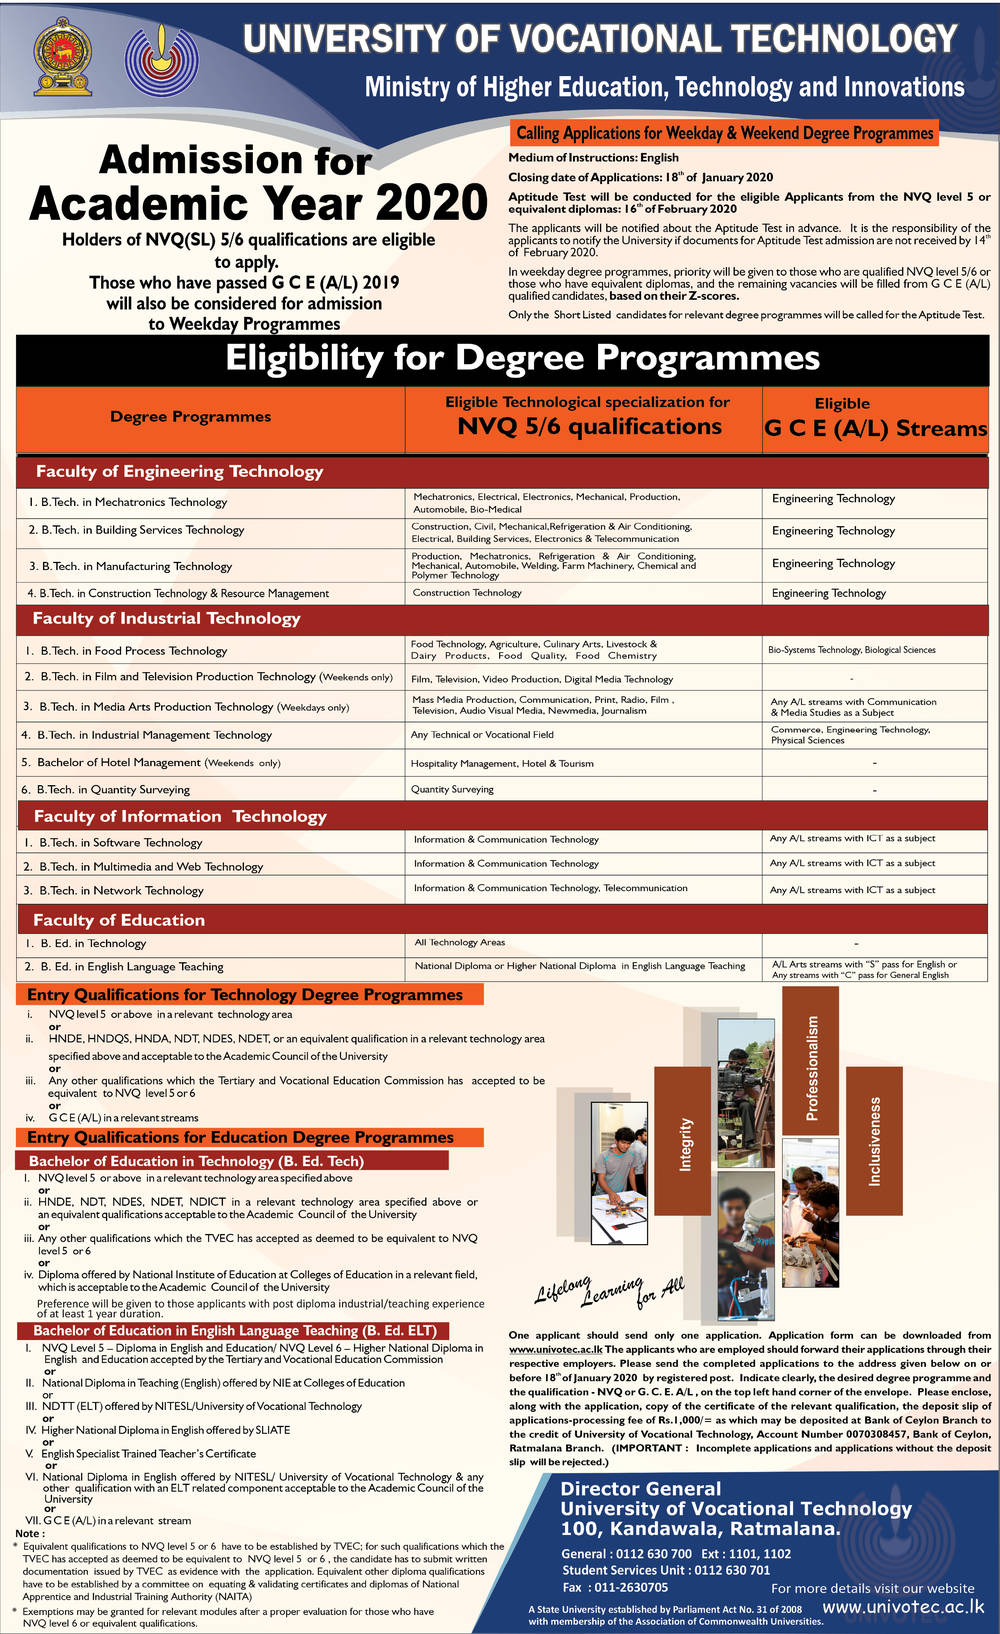 Admission for Academic Year 2020 - University of Vocational Technology